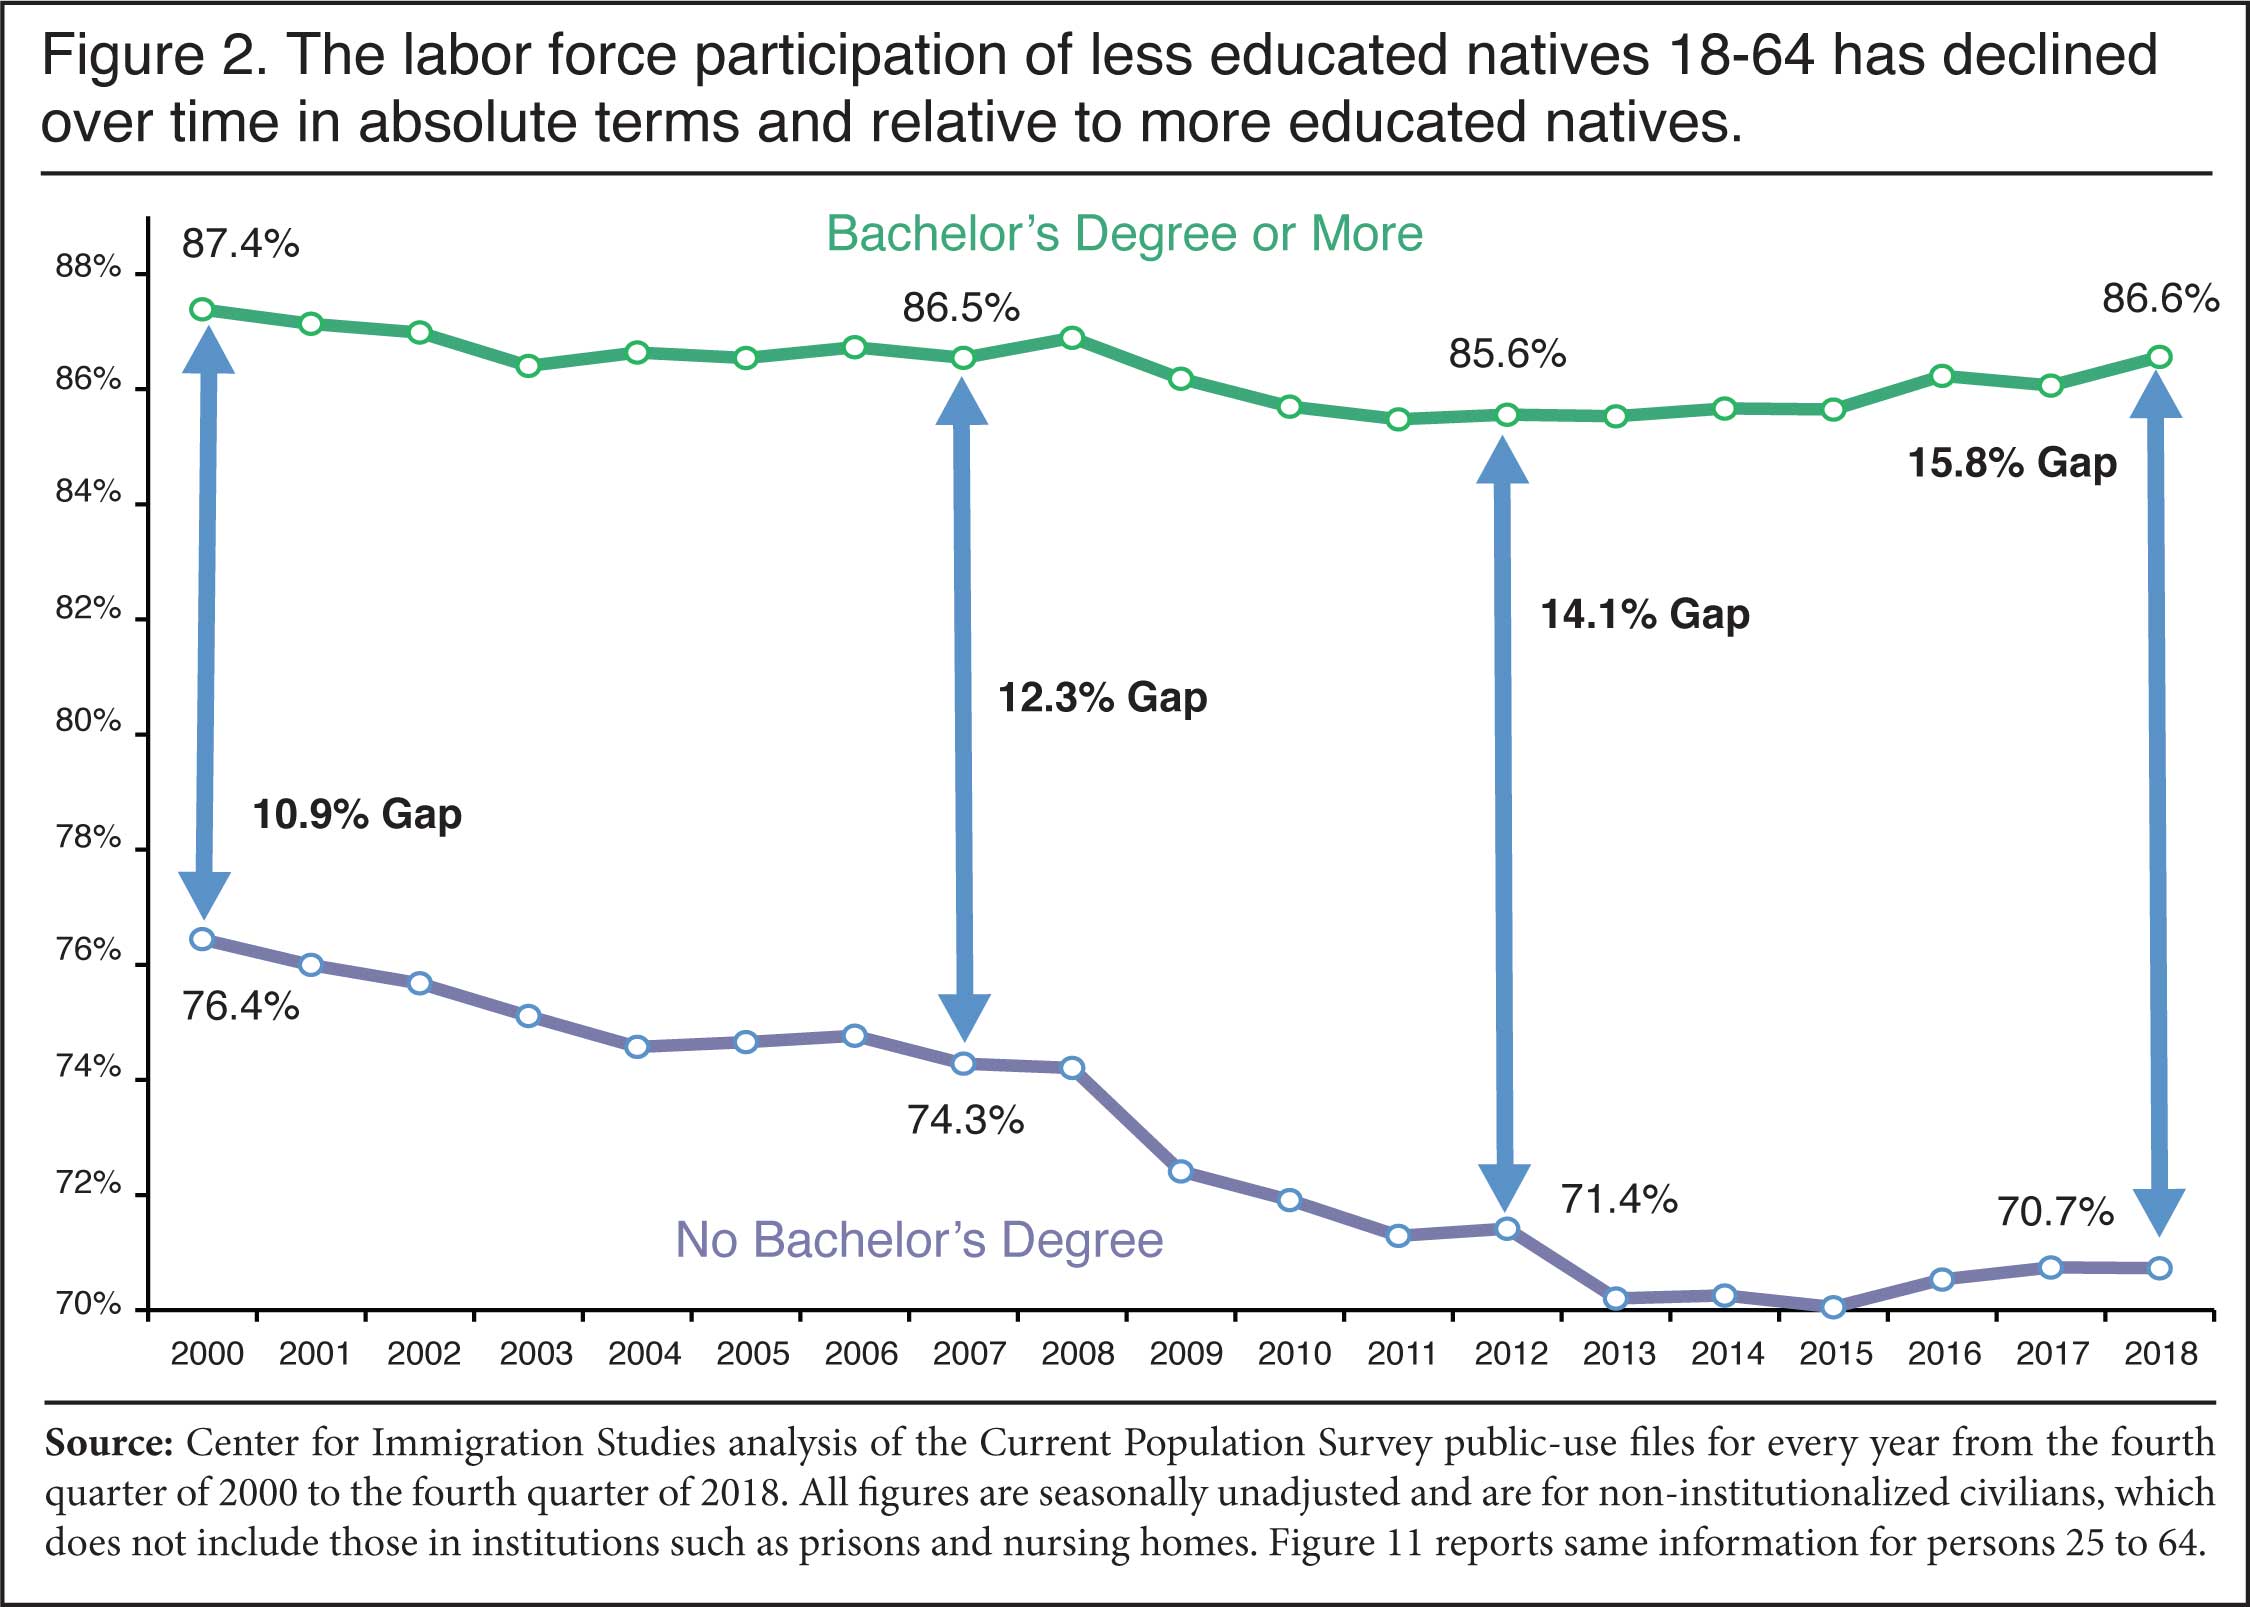 Graph: Labor Force Participation of Less Educated Natives 18-64 has declined over time.